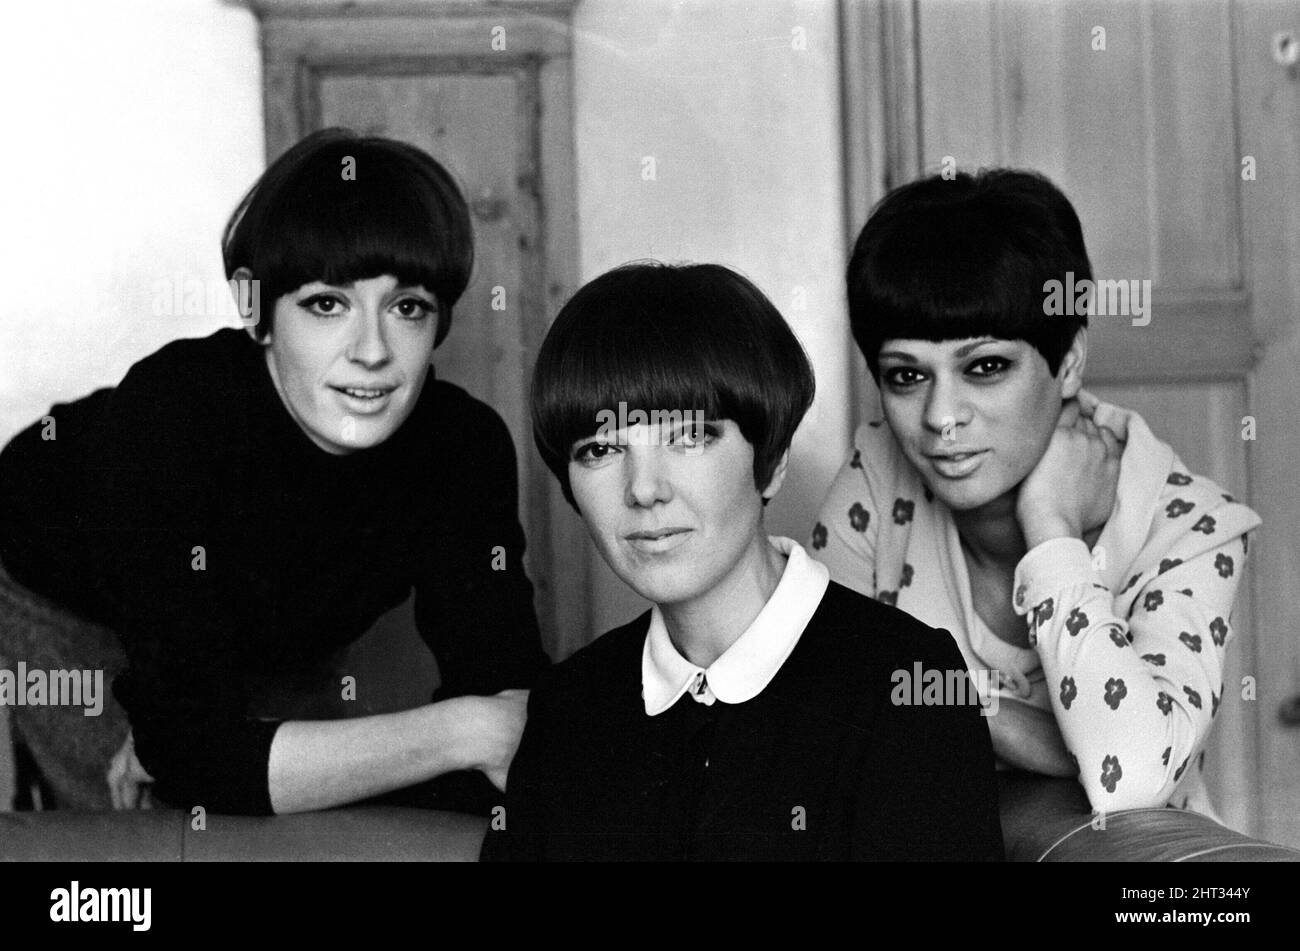 Susan Gellard (left) Mary Quant (centre) Jan De Souza (right) with their Vidal Sassoon hairstyles.The Vidal Sassoon hairstyle is hugely popular in the mid 1960s.  Picture taken  2nd March 1965 Stock Photo